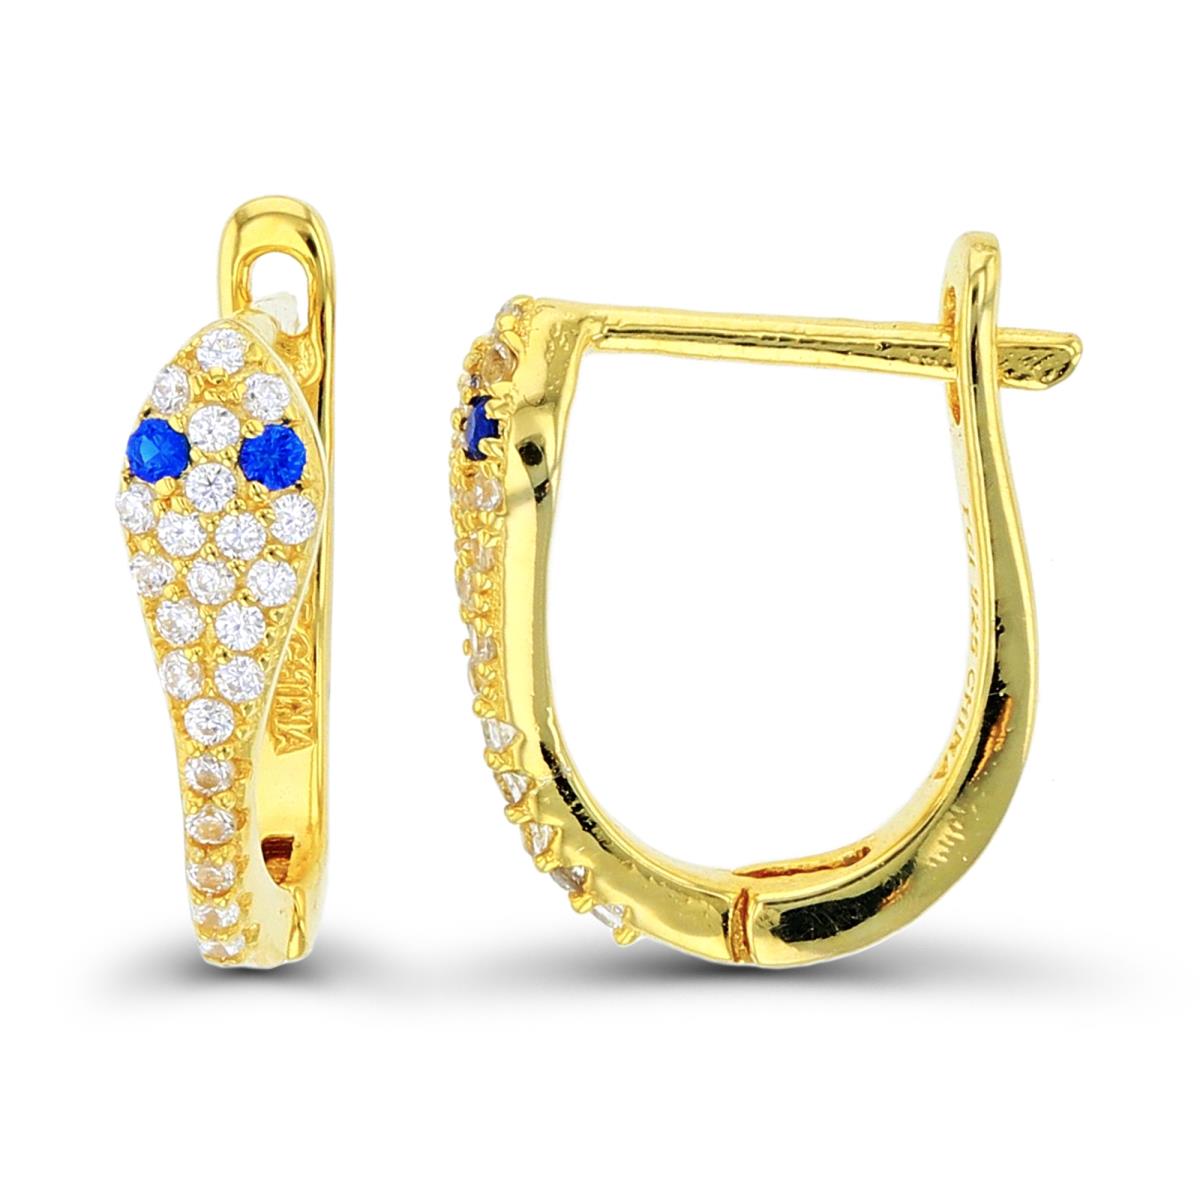 Sterling Silver+1Micron Yellow Gold Rnd White CZ & #113 Blue Spinel Snake Earrings